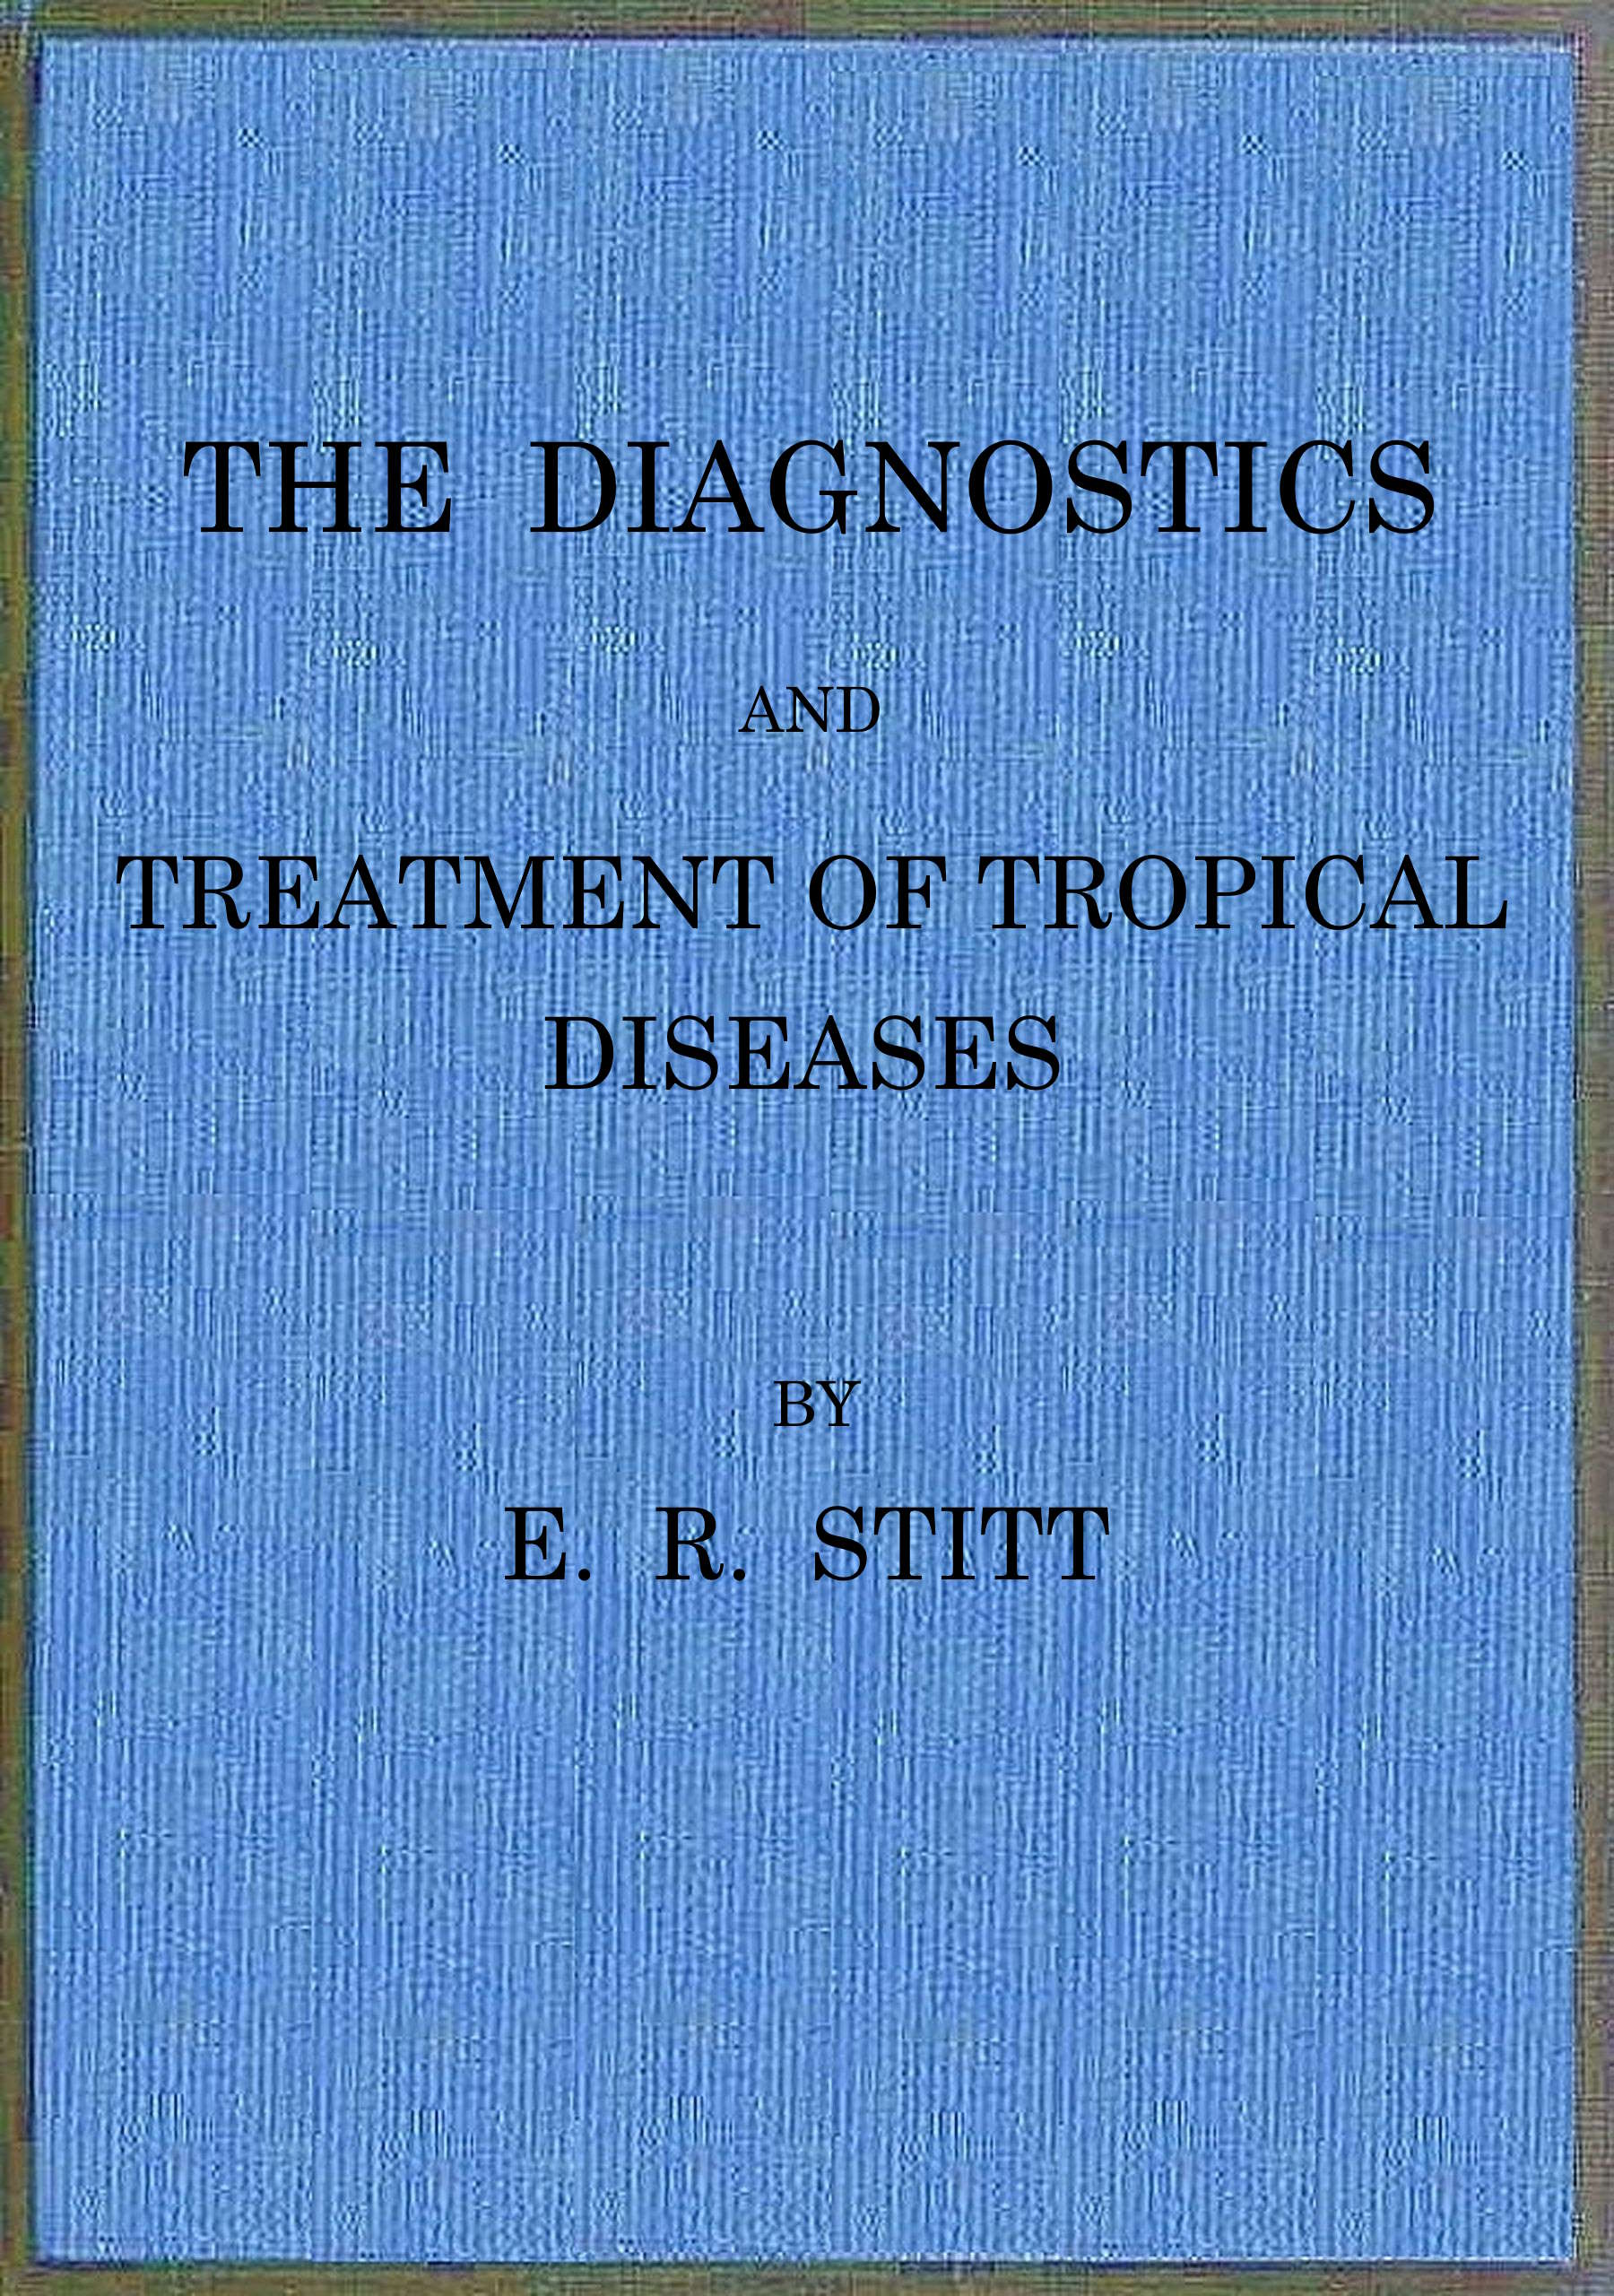 The diagnostics and treatment of tropical diseases